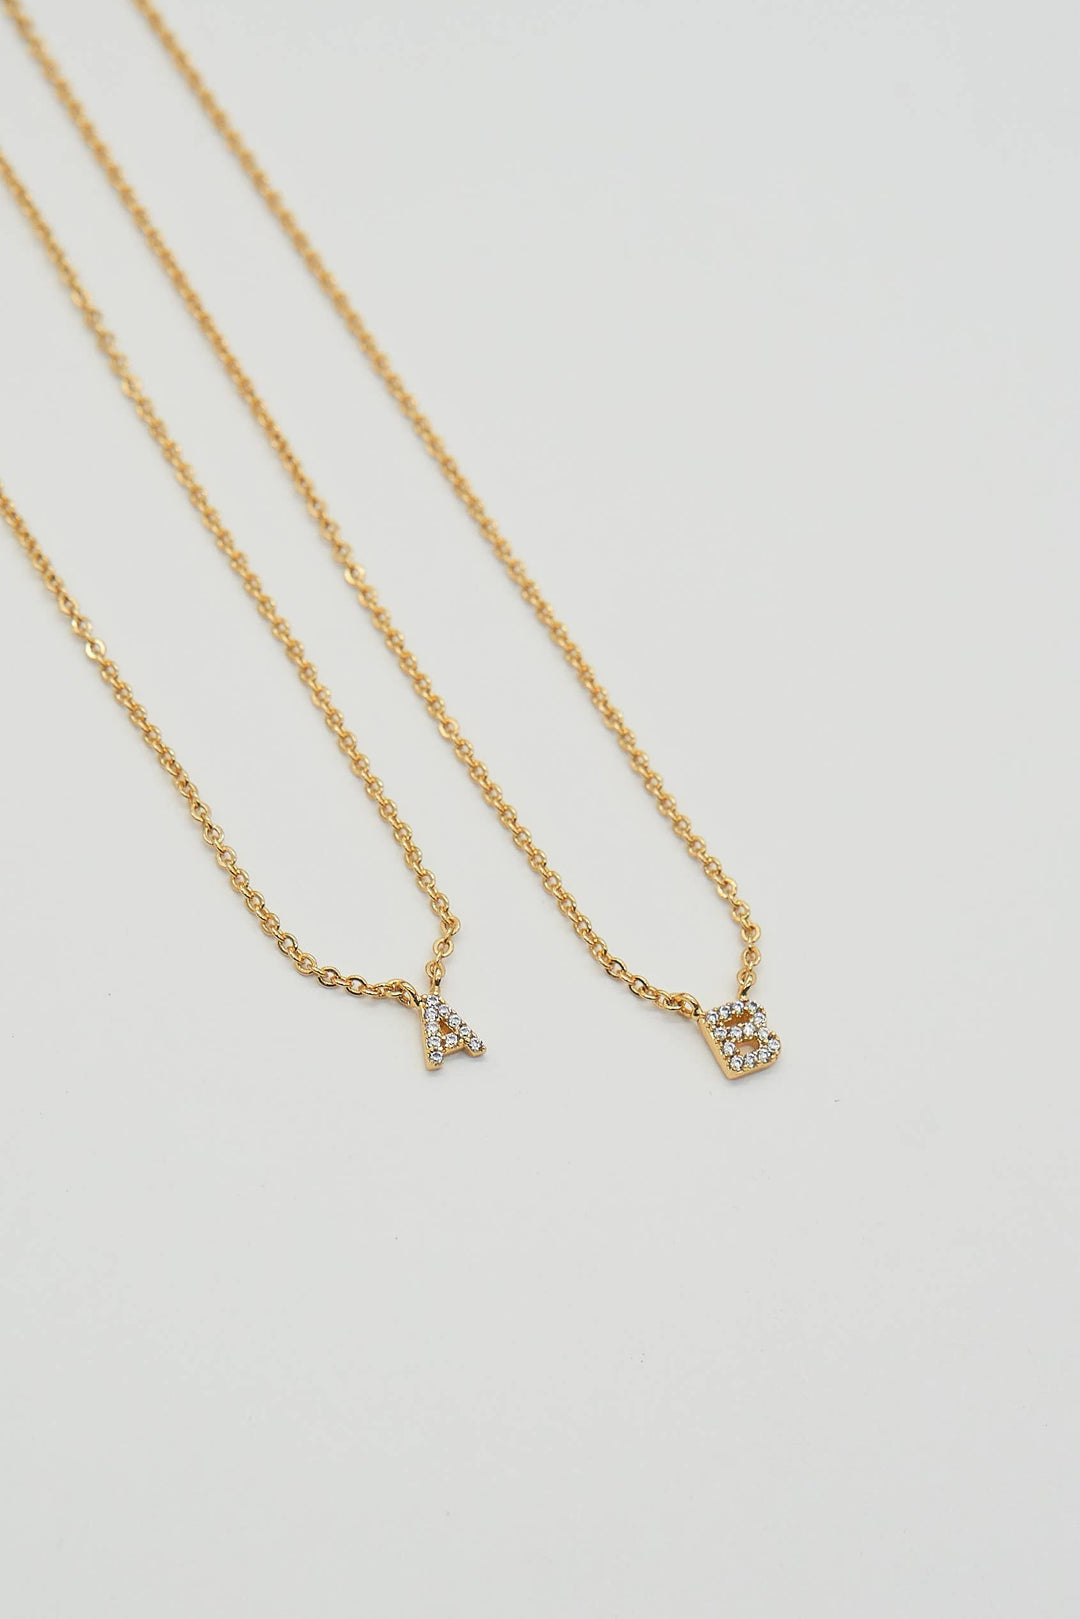 Shiny Initial Necklace: Holiday Favorite!: K